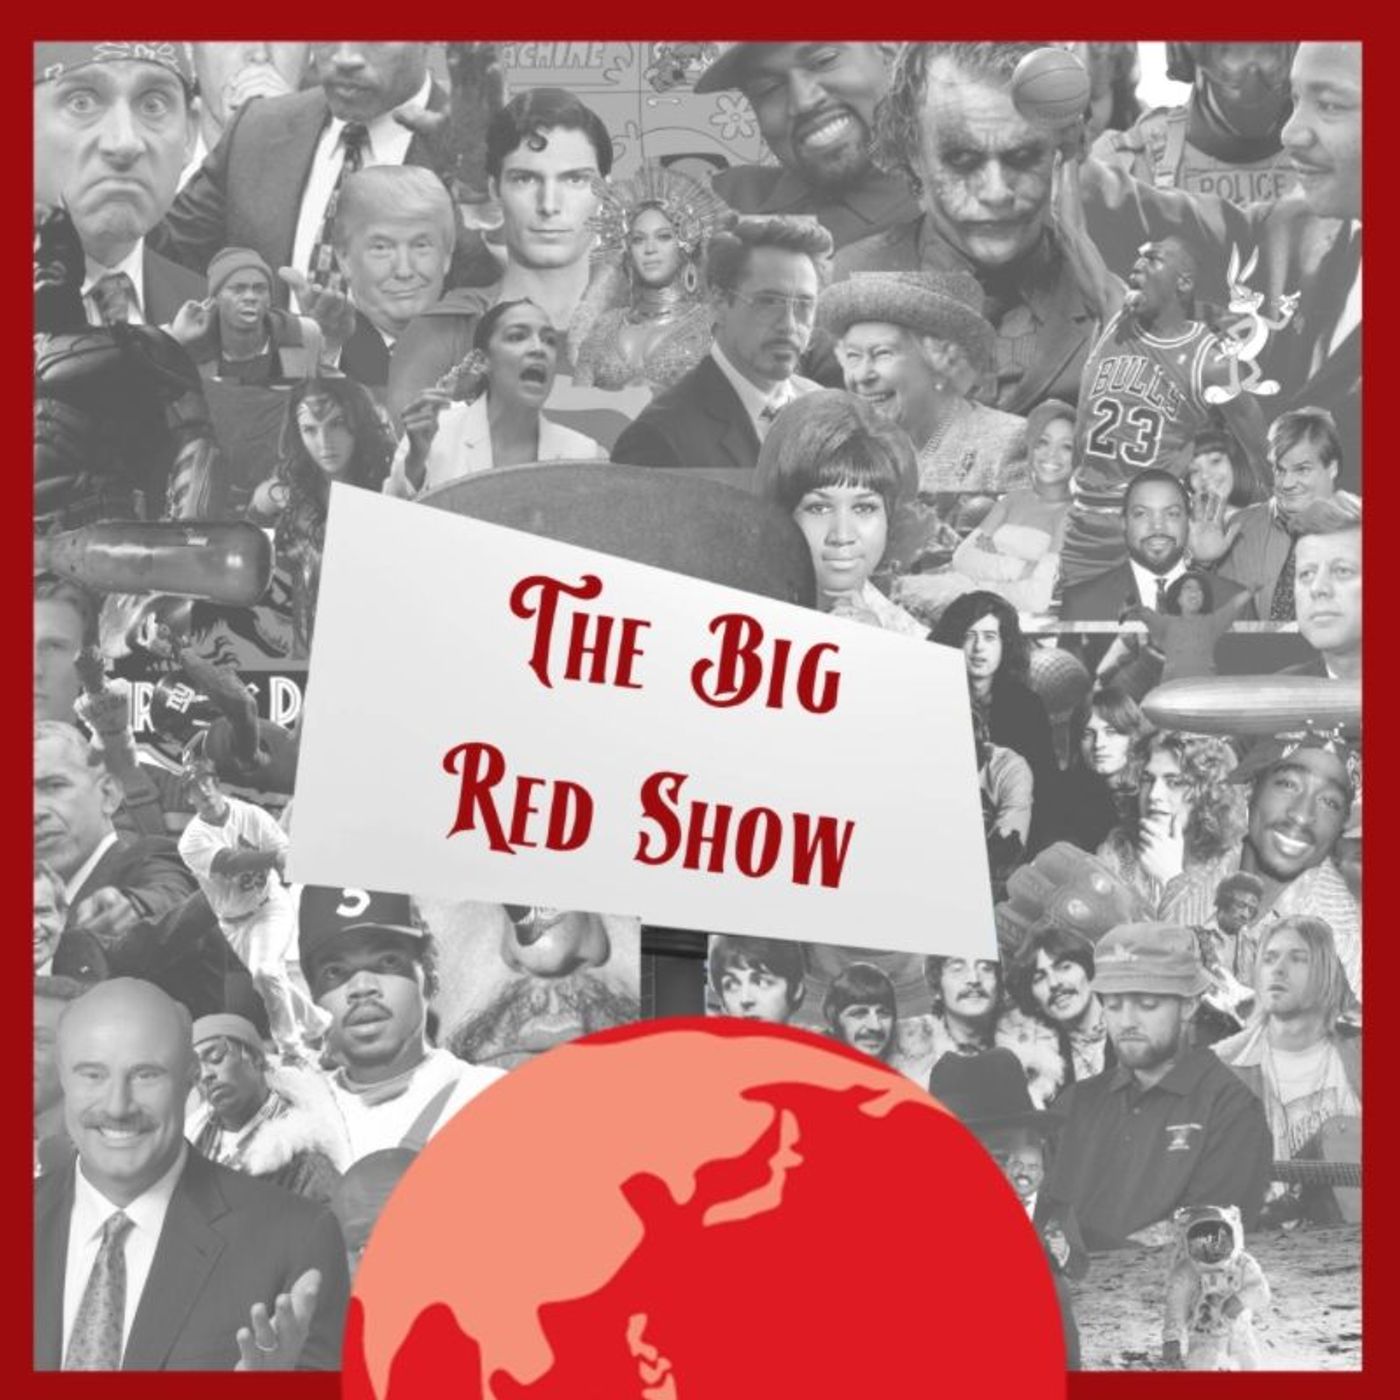 The Big Red Show